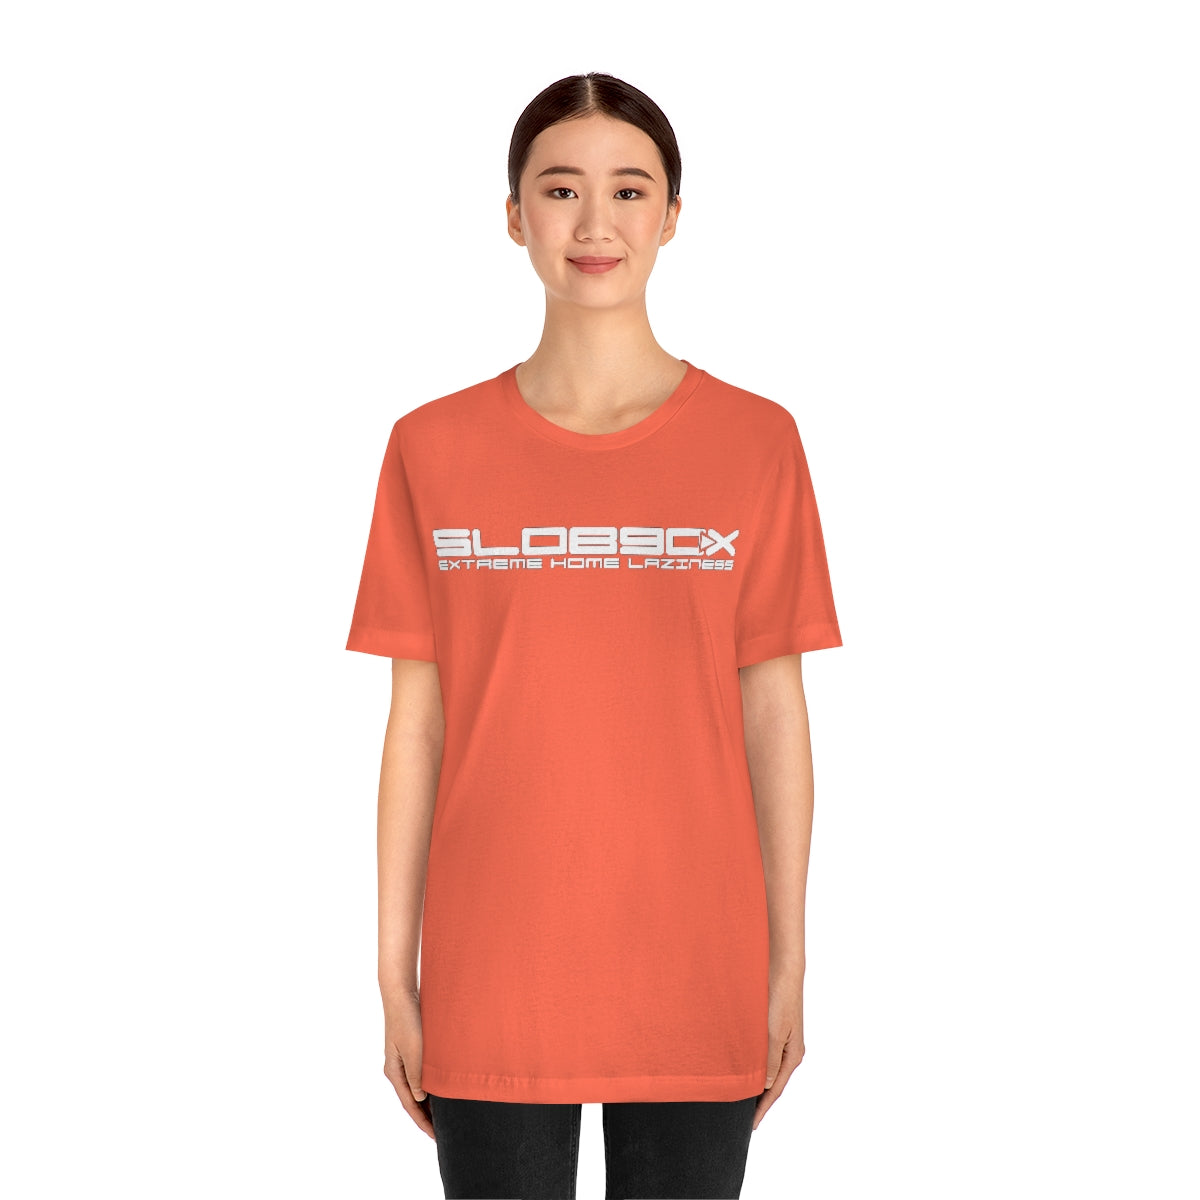 SLOB90X - LUNCH THERAPY - Unisex Jersey Short Sleeve Tee